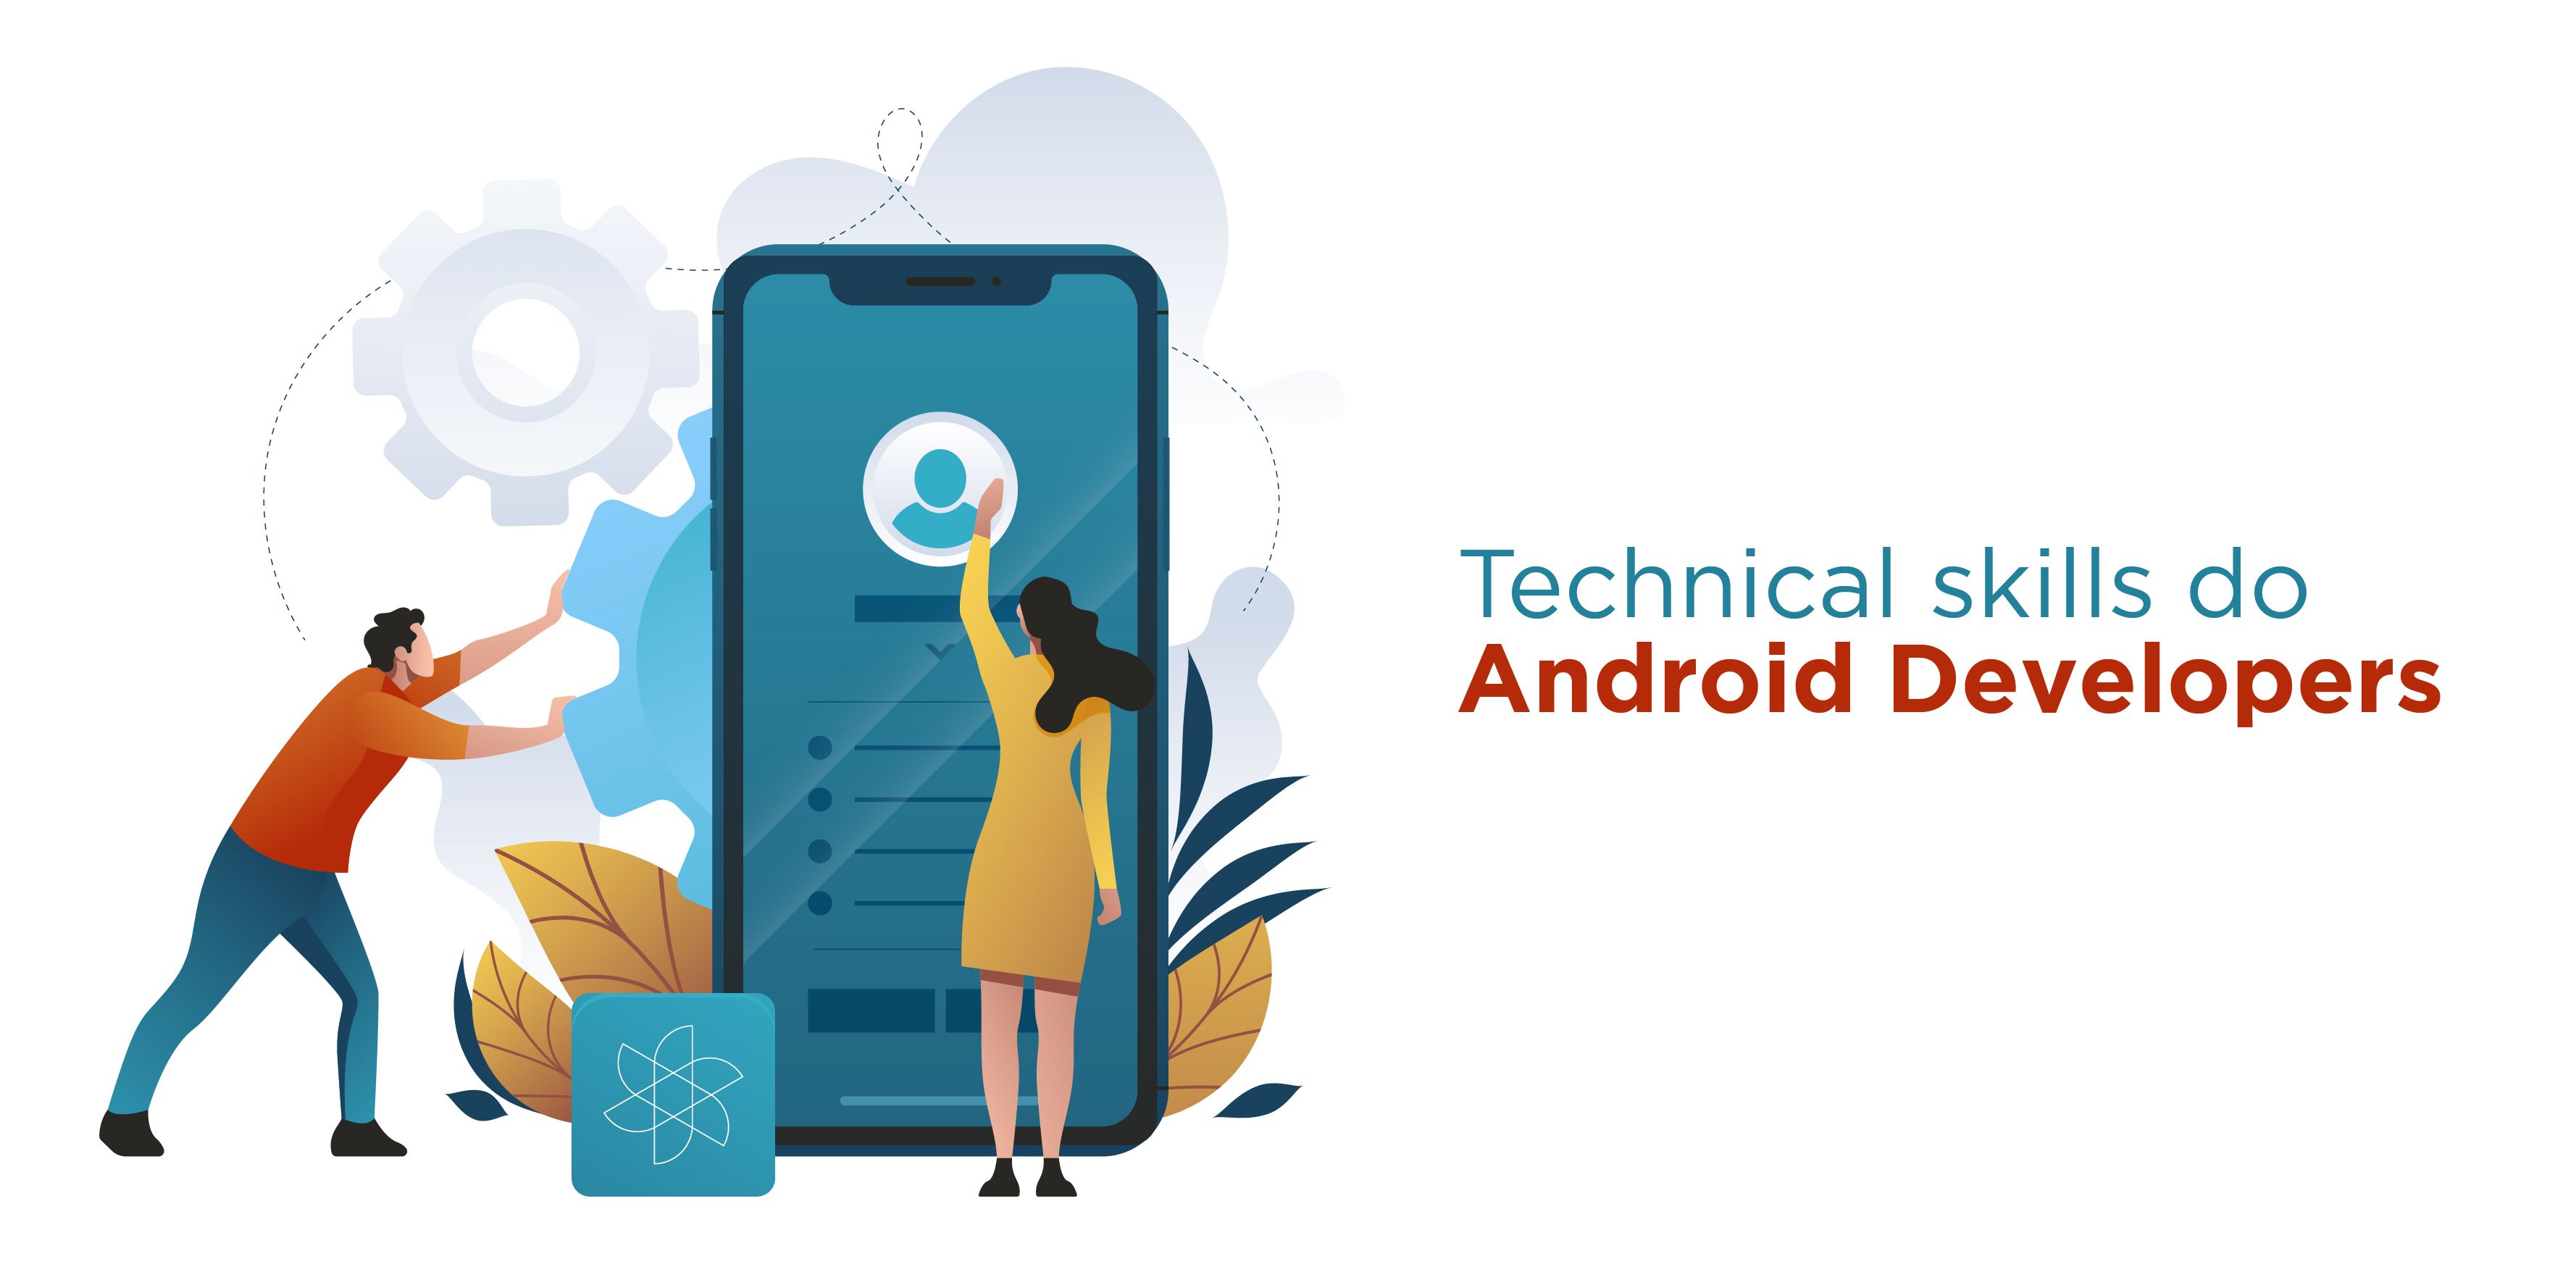 What Technical skills do Remote Android Developers need to have?